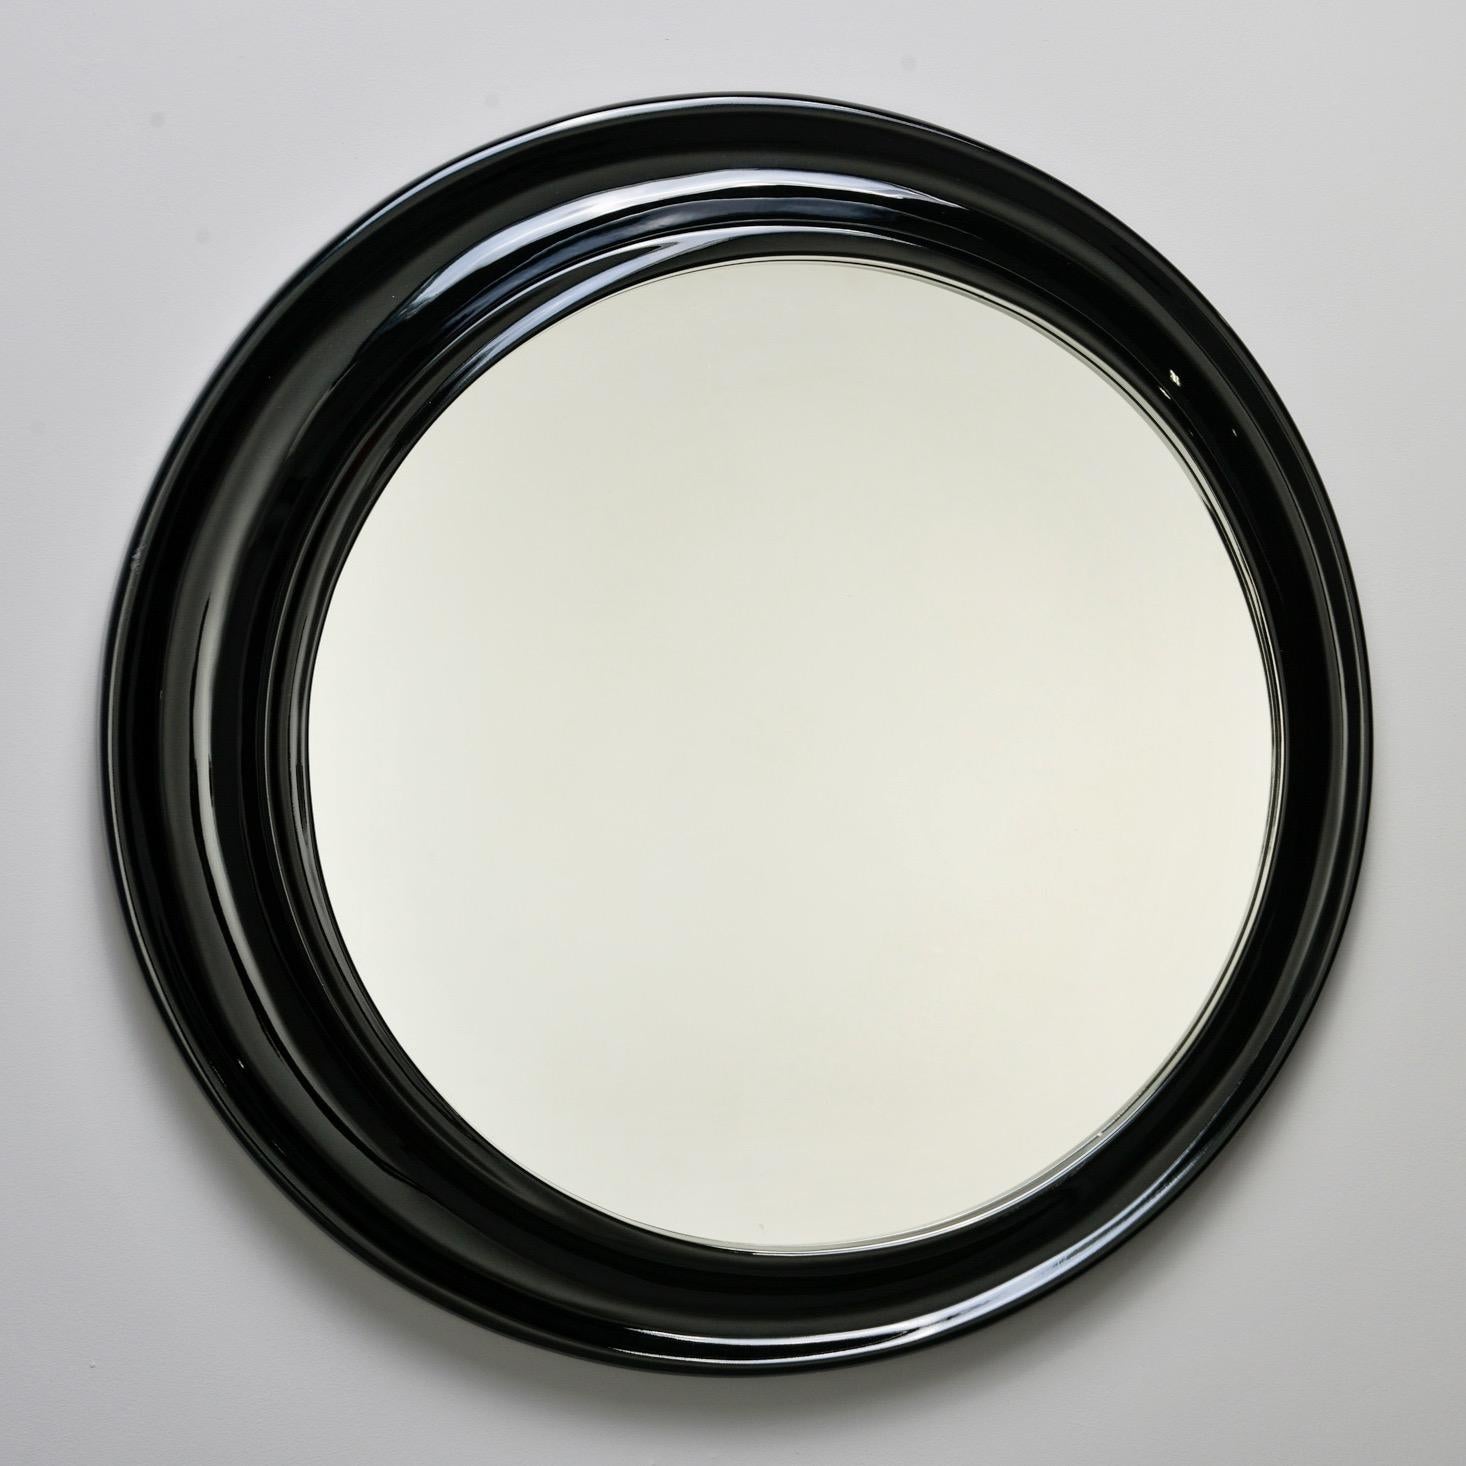 Italian round mirror features a deep set black frame with one edge wider and slightly off-center, circa 1970s. Actual mirror is 24” diameter. Unknown maker.
  